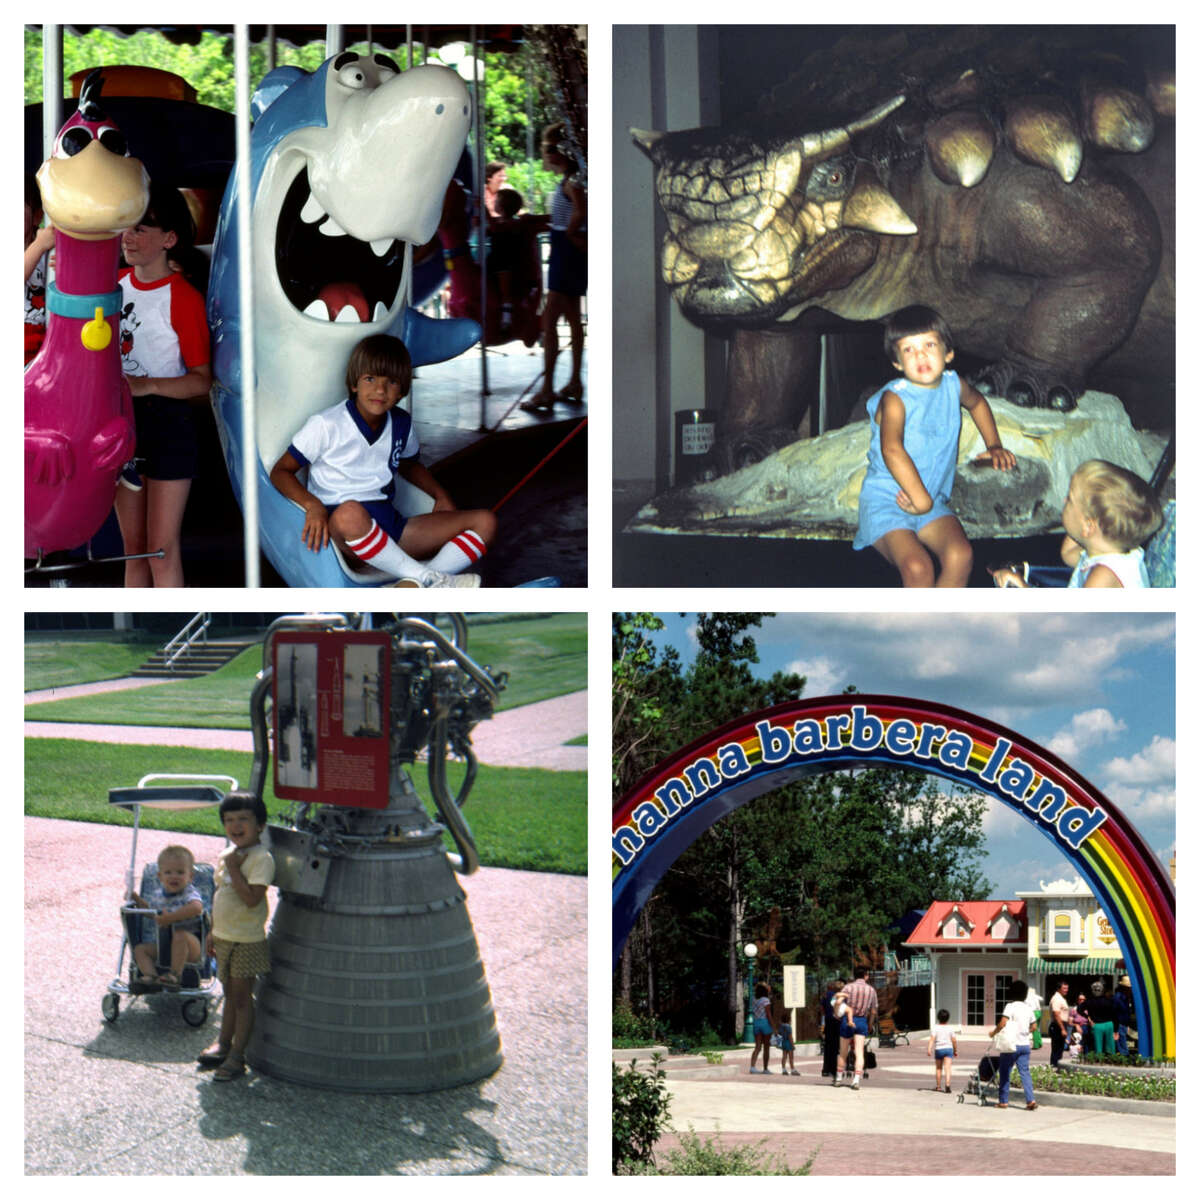 PHOTOS: What it looked like to vacation in Houston as a kid in the 1970s and 80s  Virginia resident Larry Syverson posted photos of his family's first vacation in the Bayou City. They visited NASA, the Houston Museum of Natural Sciences and the short-lived Hanna-Barbera Land.  >>> Click through the gallery to see what it looked like for a kid 